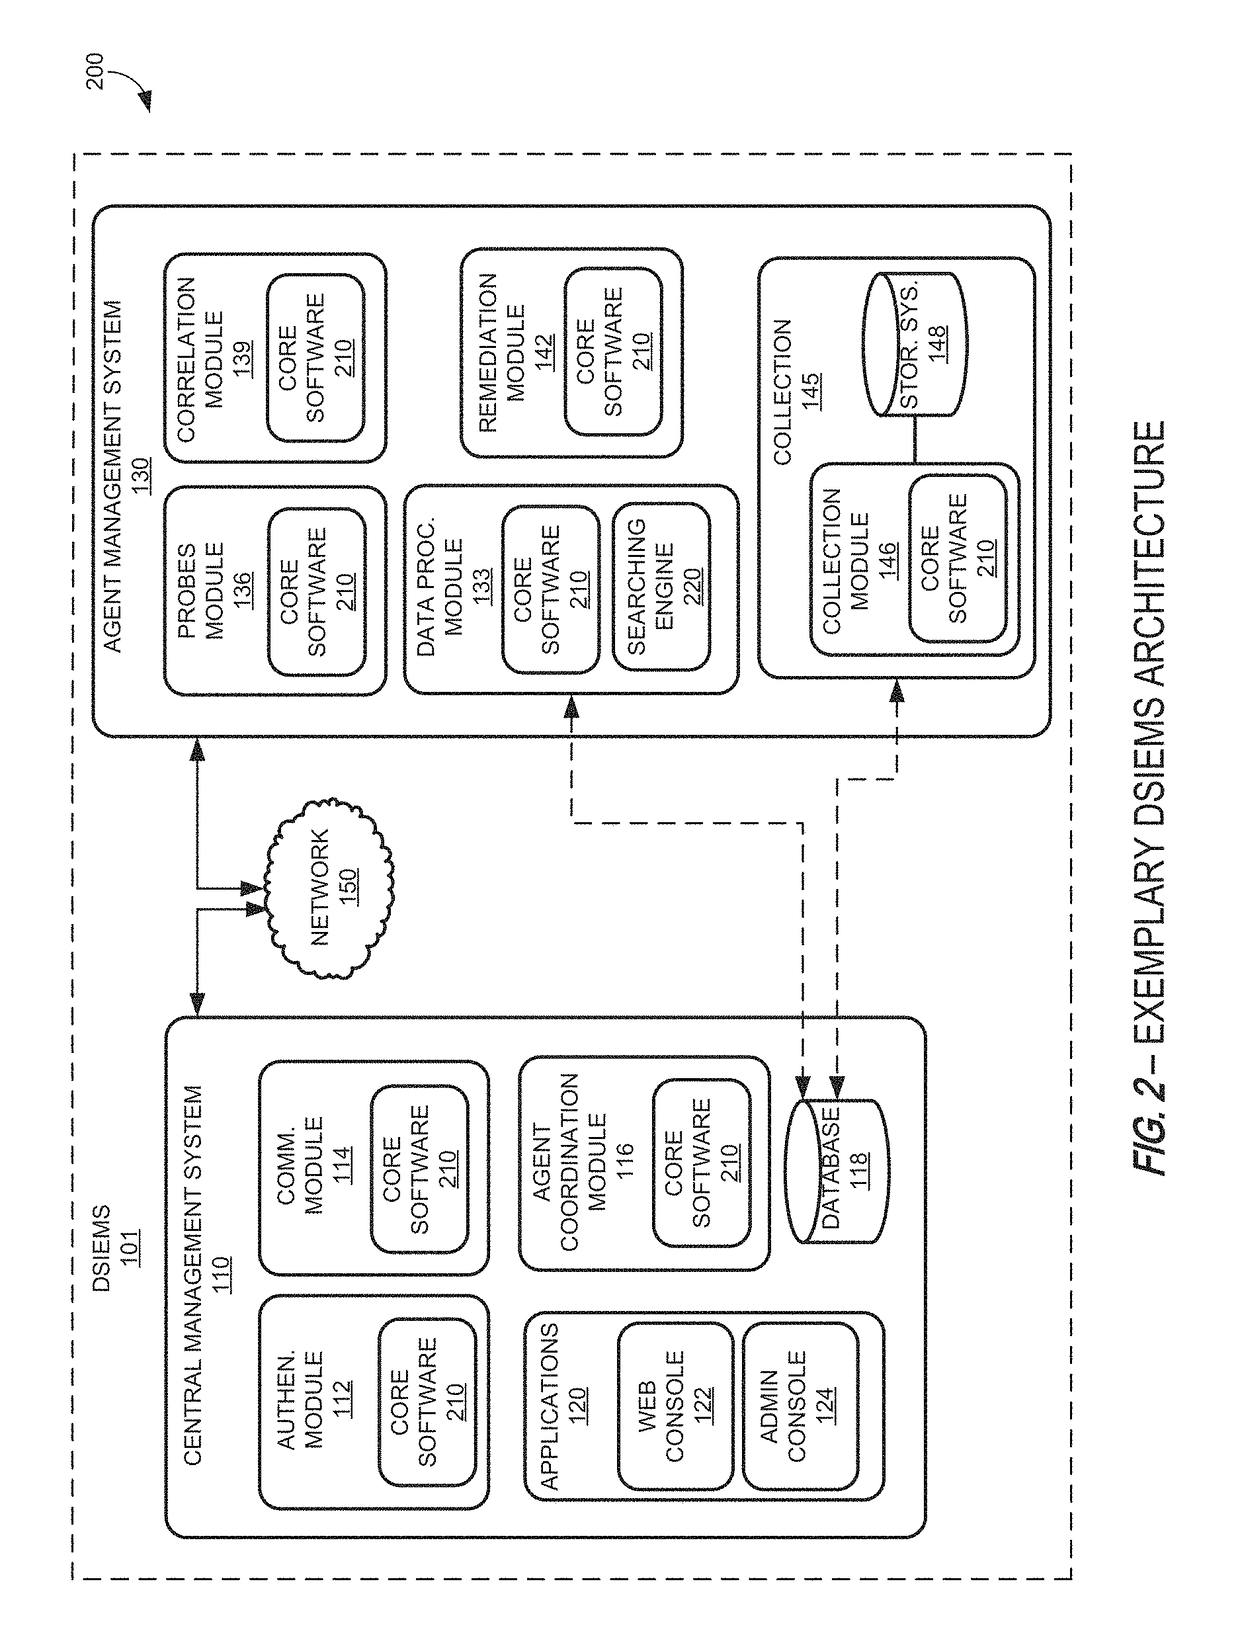 Systems and methods for providing a security information and event management system in a distributed architecture